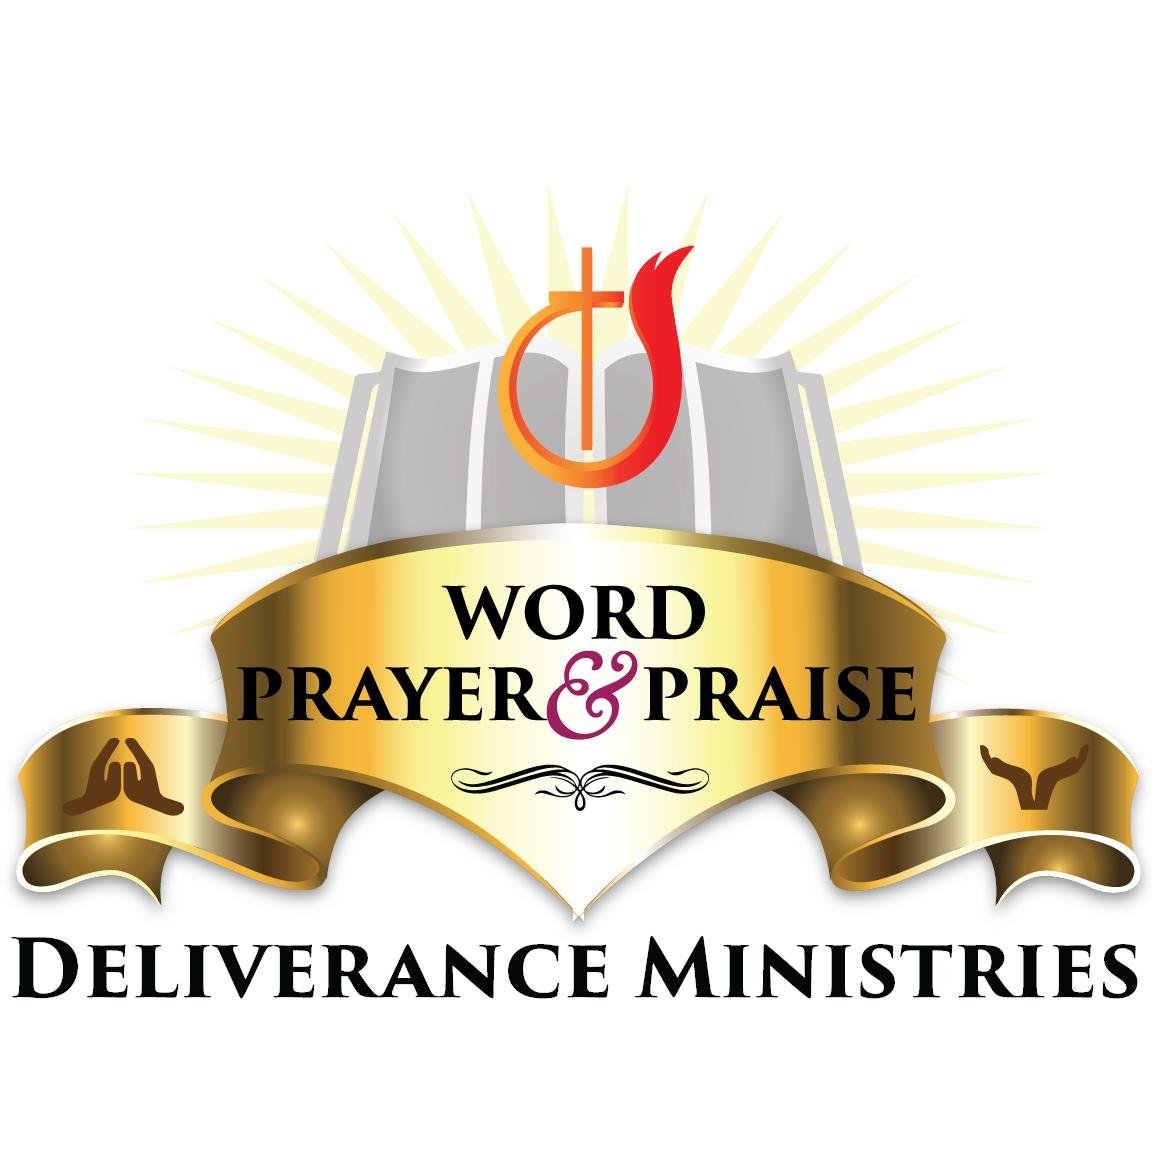 Jesus had a deliverance ministry and every church should be able to release deliverance in the atmosphere to anyone who needs it.